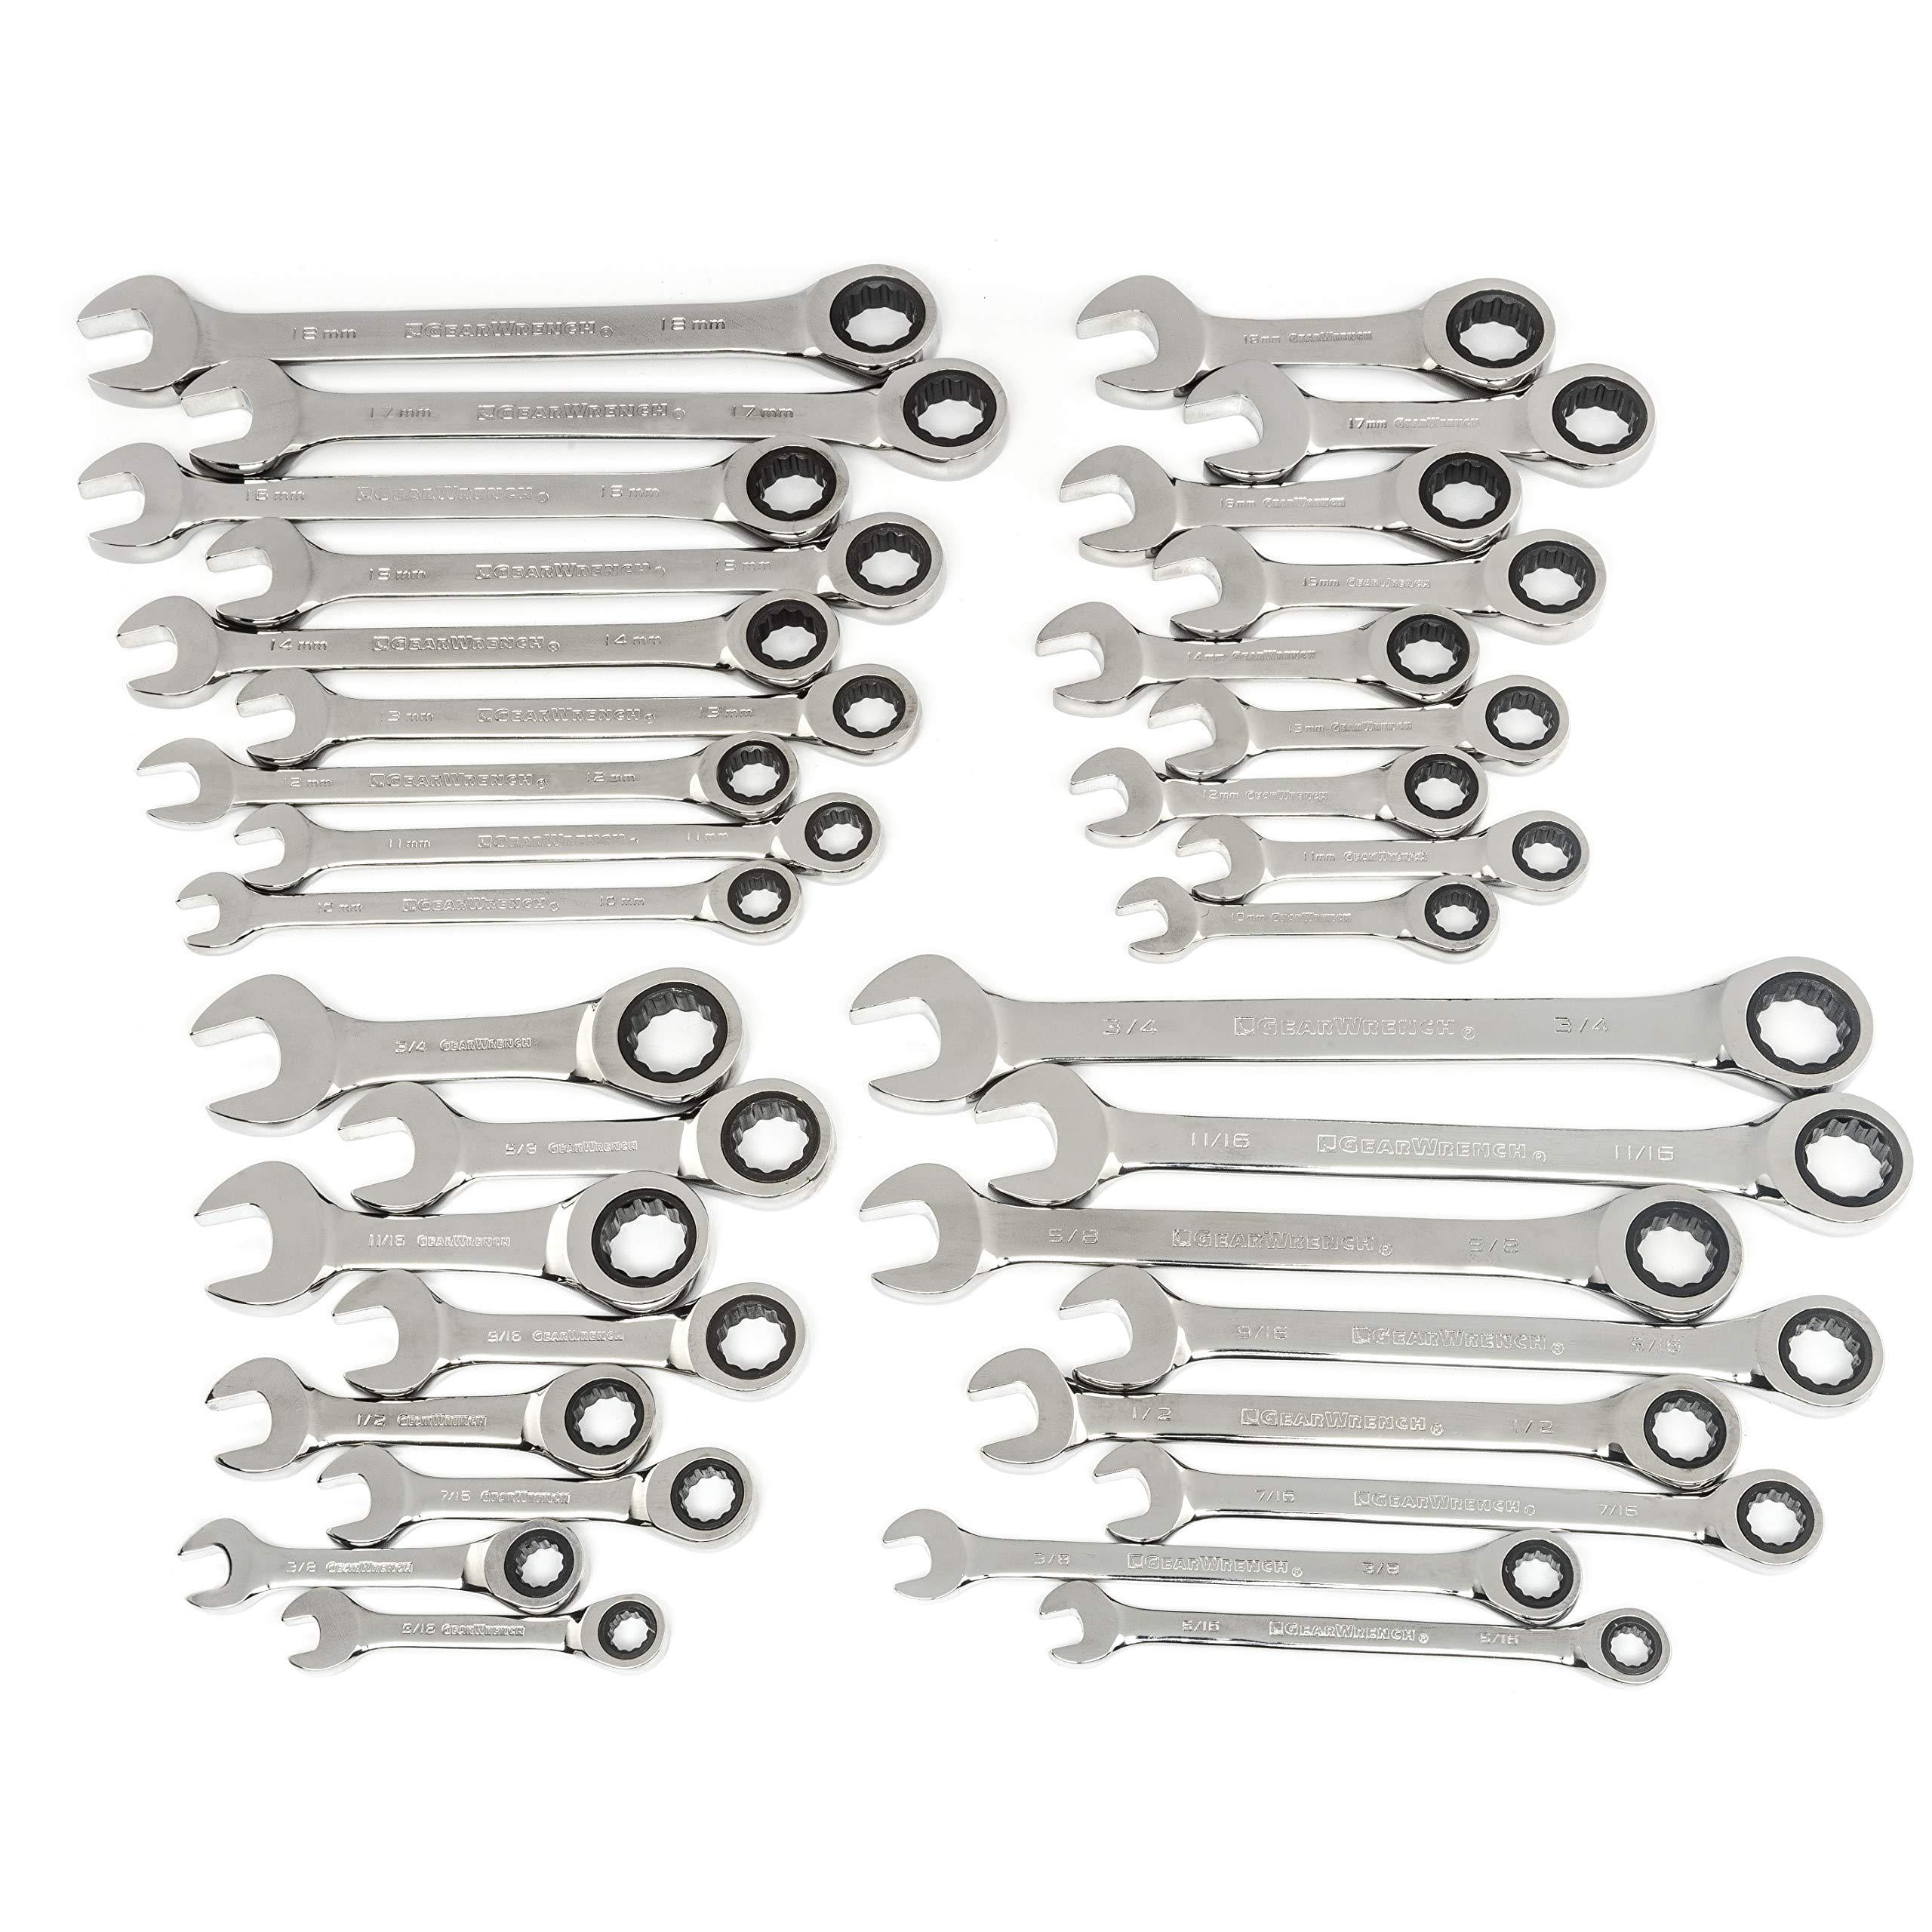 GEARWRENCH 16 Pc 12 Point Ratcheting Combination Metric Wrench Set w/12 Point XL GearBox Double Box Ratcheting Metric Wrench Set